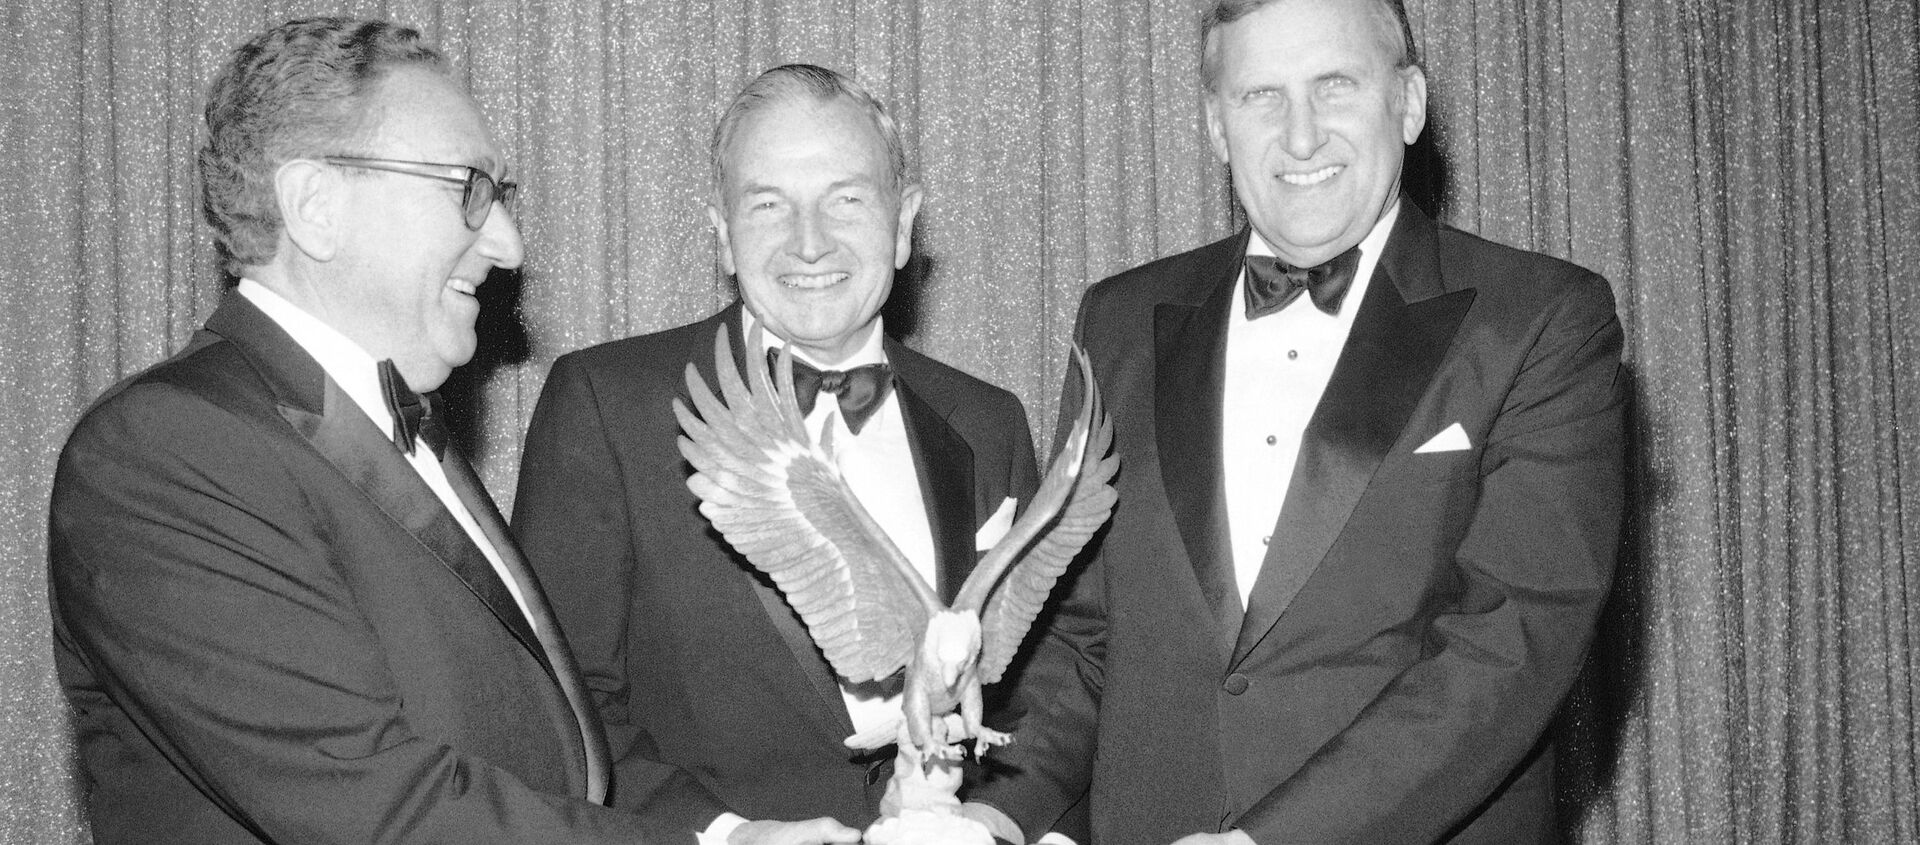 David Rockefeller, center, chairman of the Chase Manhattan's Bank's International Advisory Committee and the banks former chairman of the board and chief executive officer, receives the 1983 International Leadership Award from the U.S. Council for International Business, presented by Dr. Henry A. Kissinger, former Secretary of State, left, and Ralph A. Pfeiffer, Jr., U.S. Council Chairman, at New York's Pierre Hotel on Thursday, Dec. 9, 1983. The award recognizes outstanding contributions to world trade and investment. - Sputnik Mundo, 1920, 05.04.2017